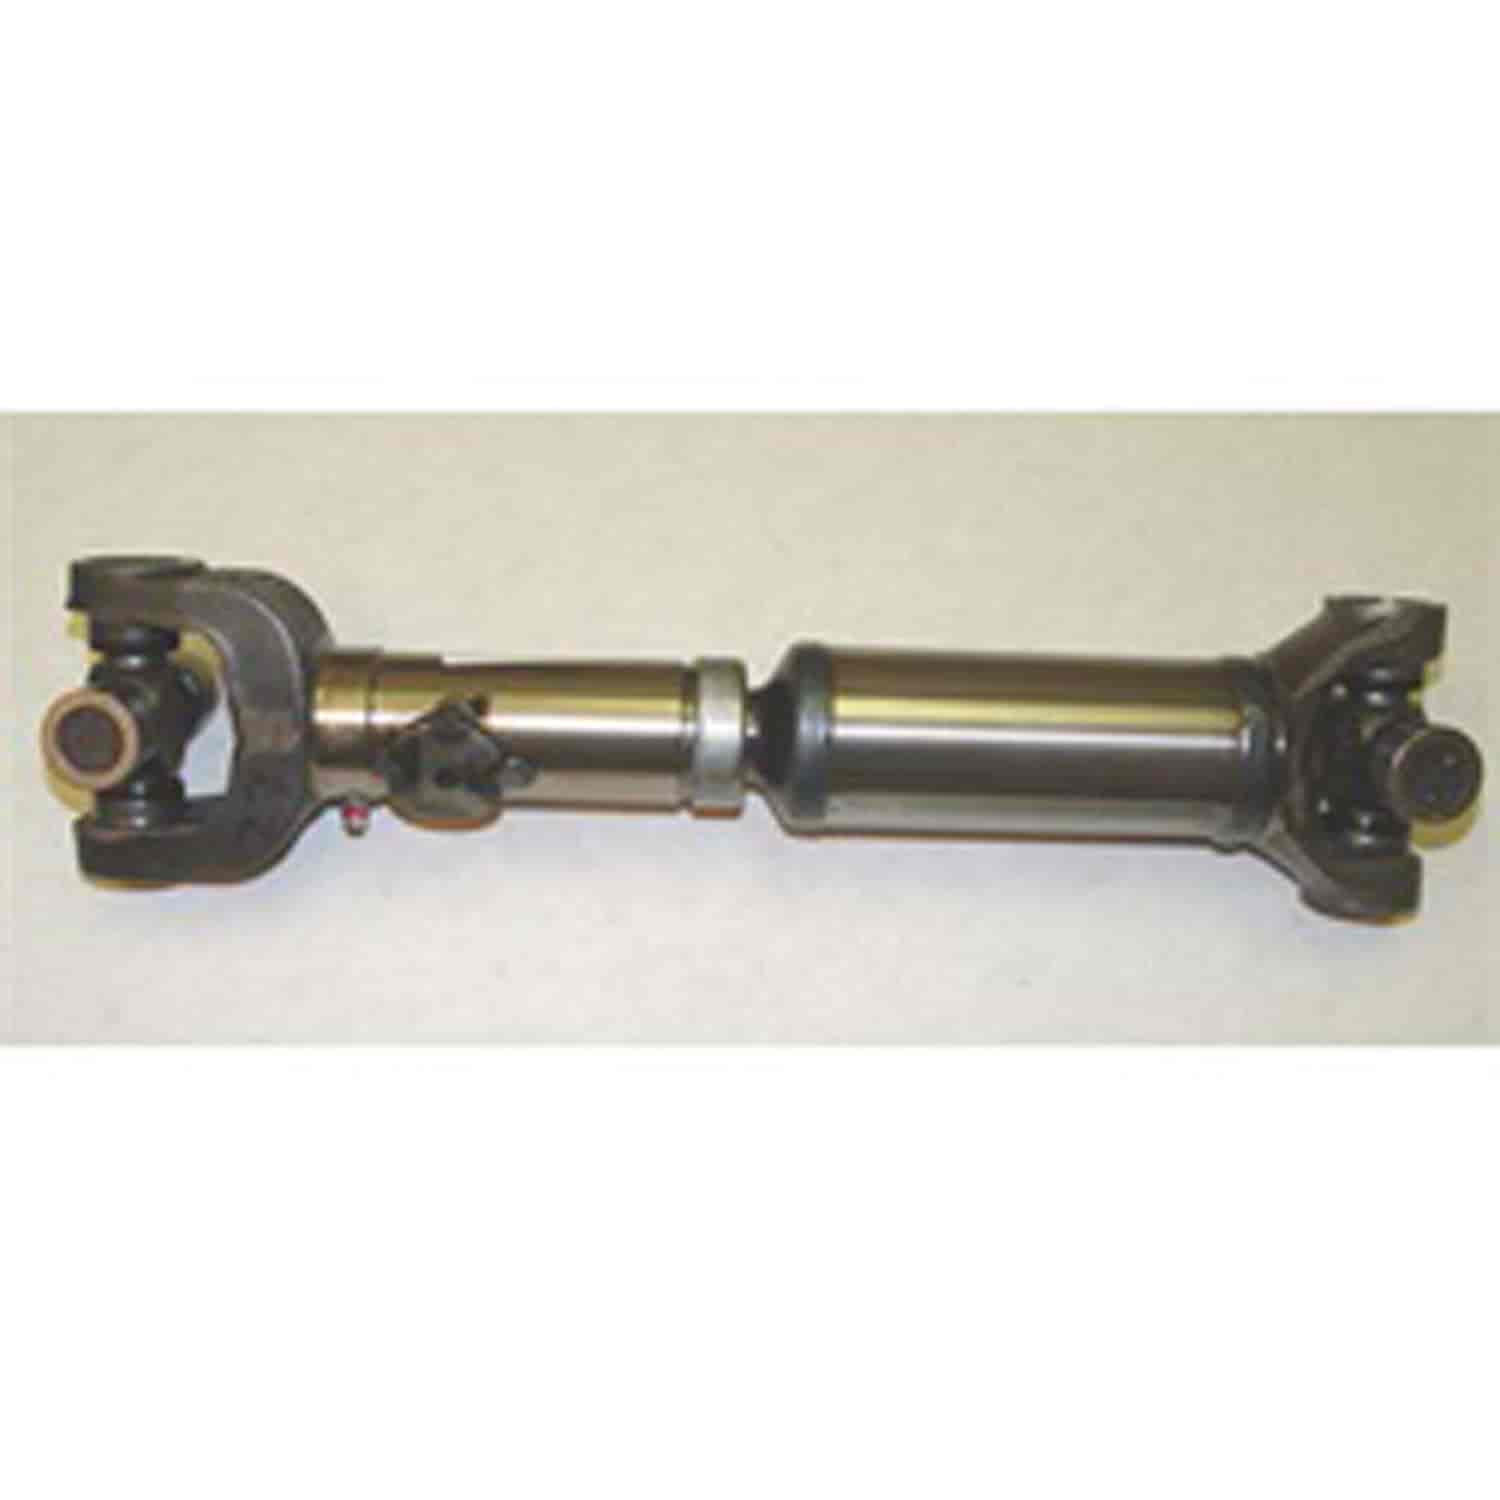 Stock replacement rear driveshaft from Omix-ADA, Fits 1980 Jeep CJ5 with 4 or 6-cylinder engines